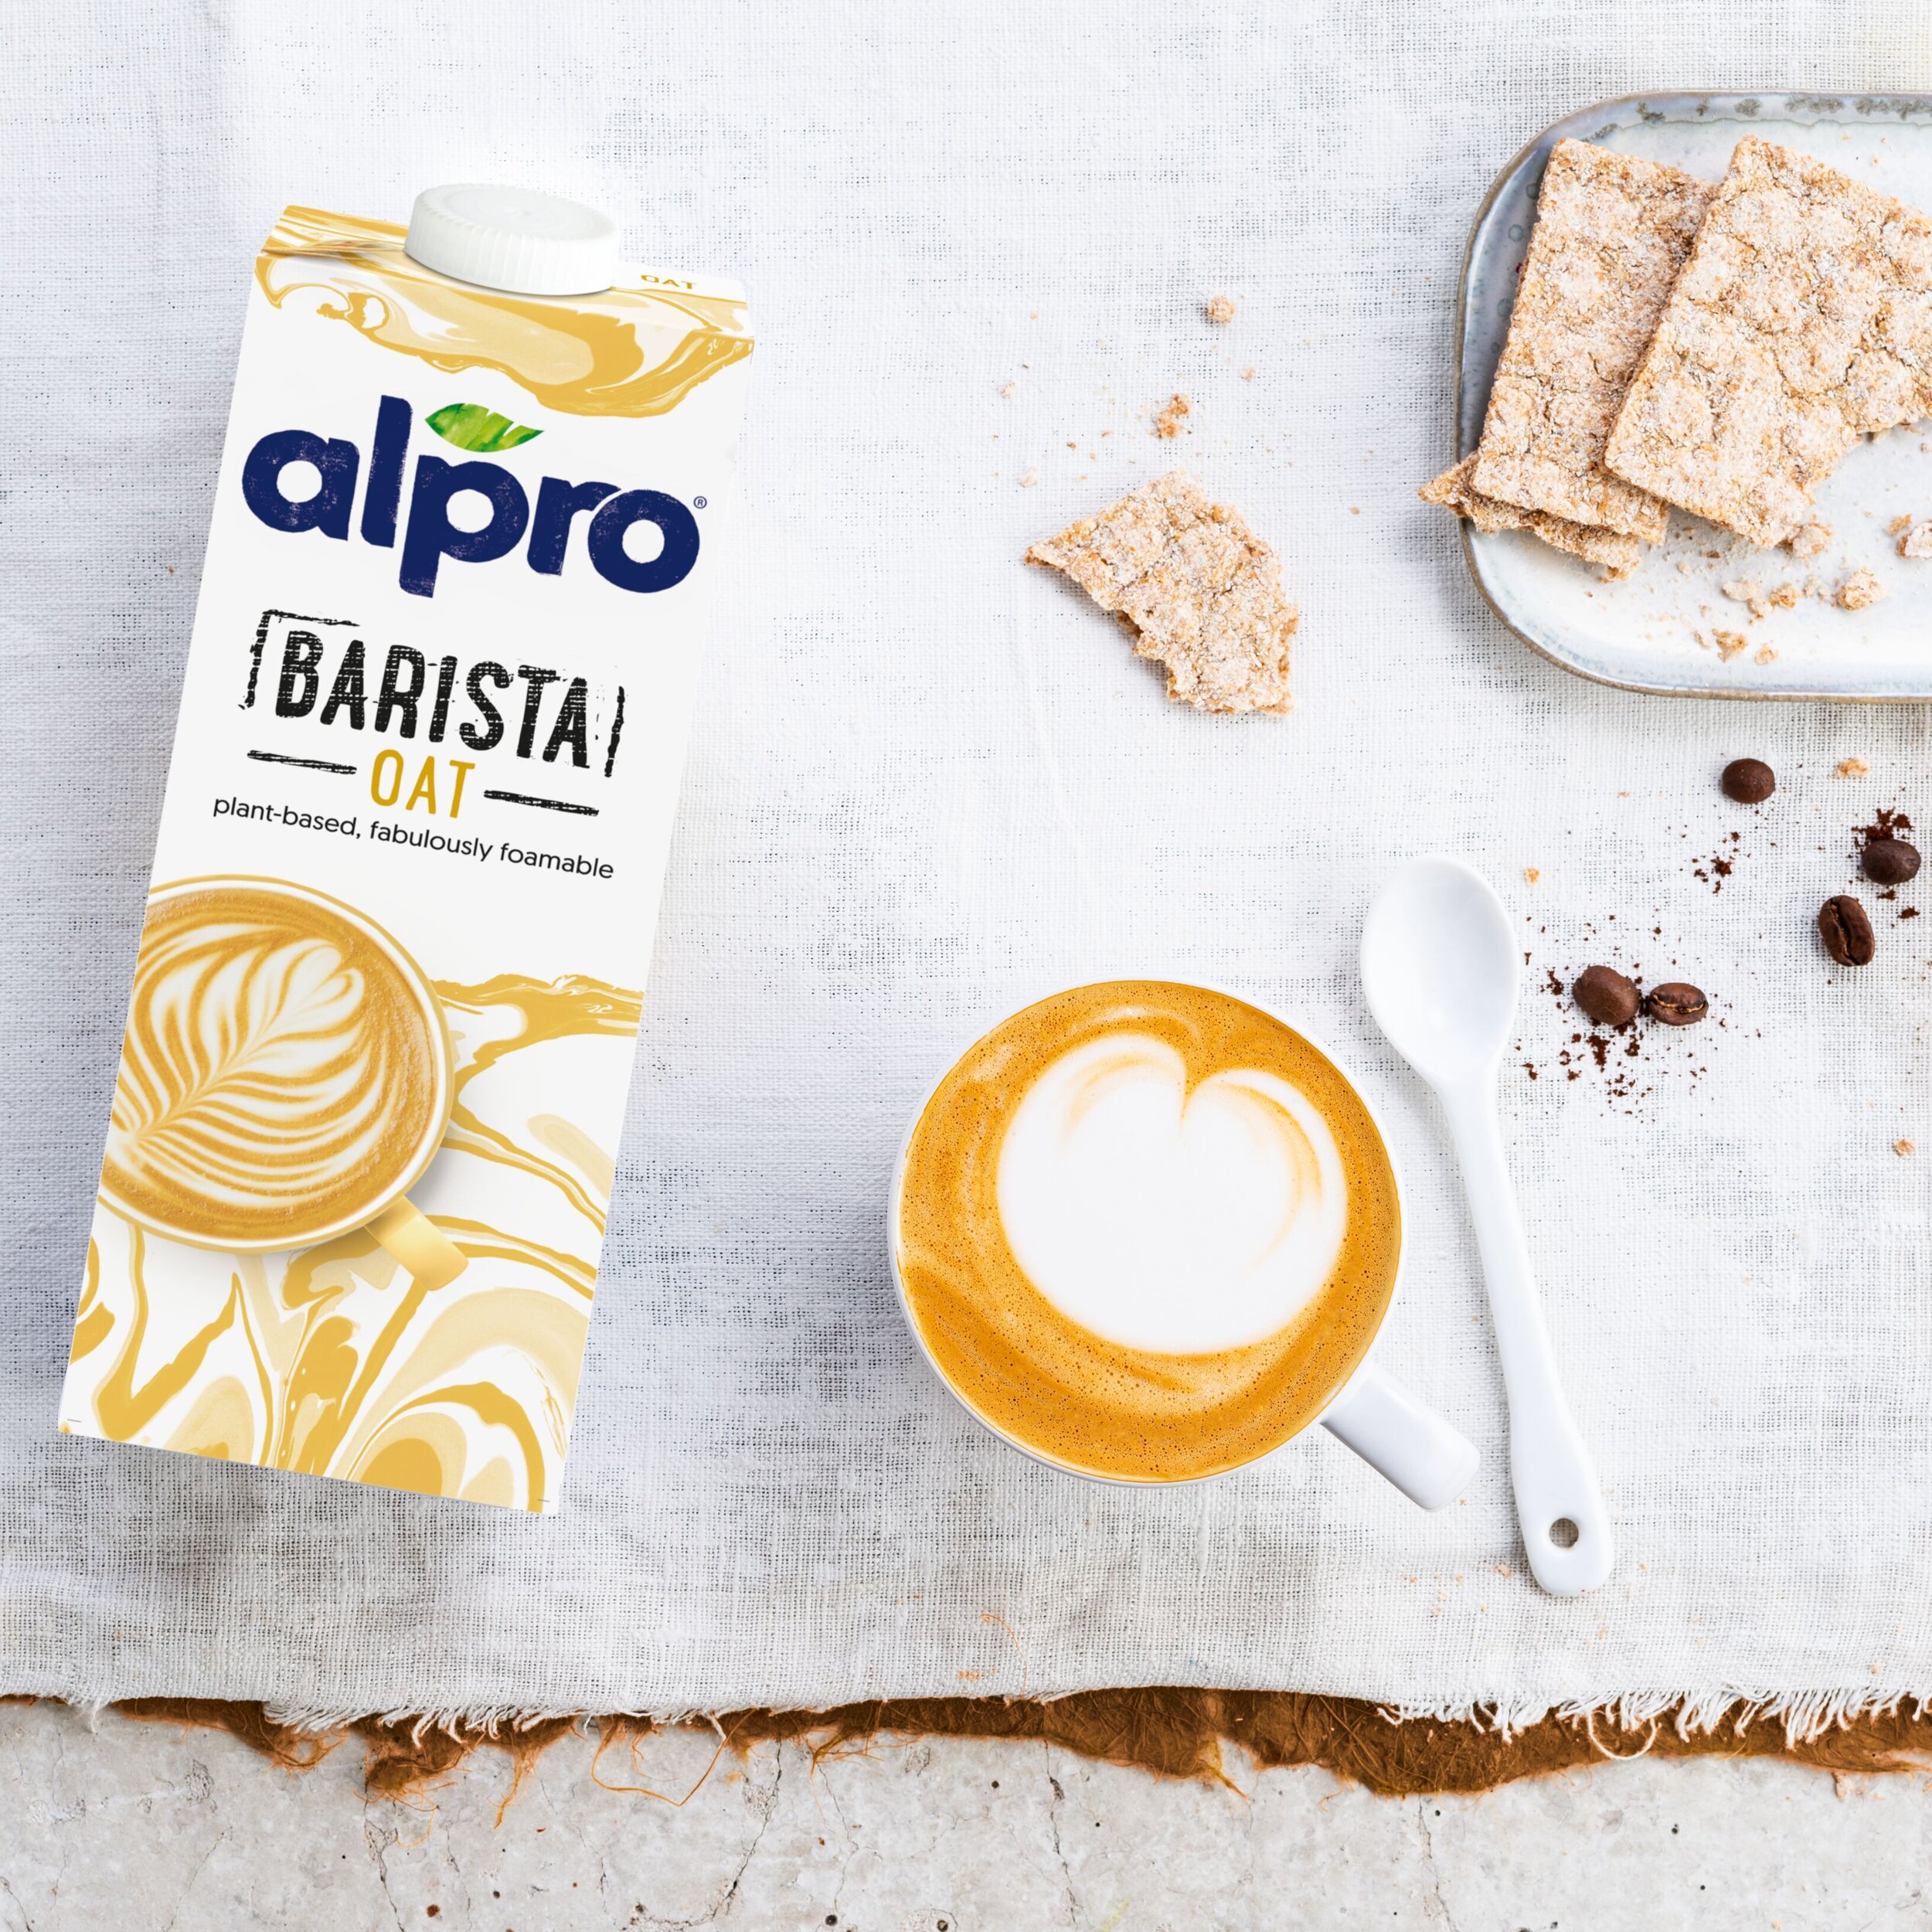 A years supply of Alpro Barista Oat Milk (Donate £60)